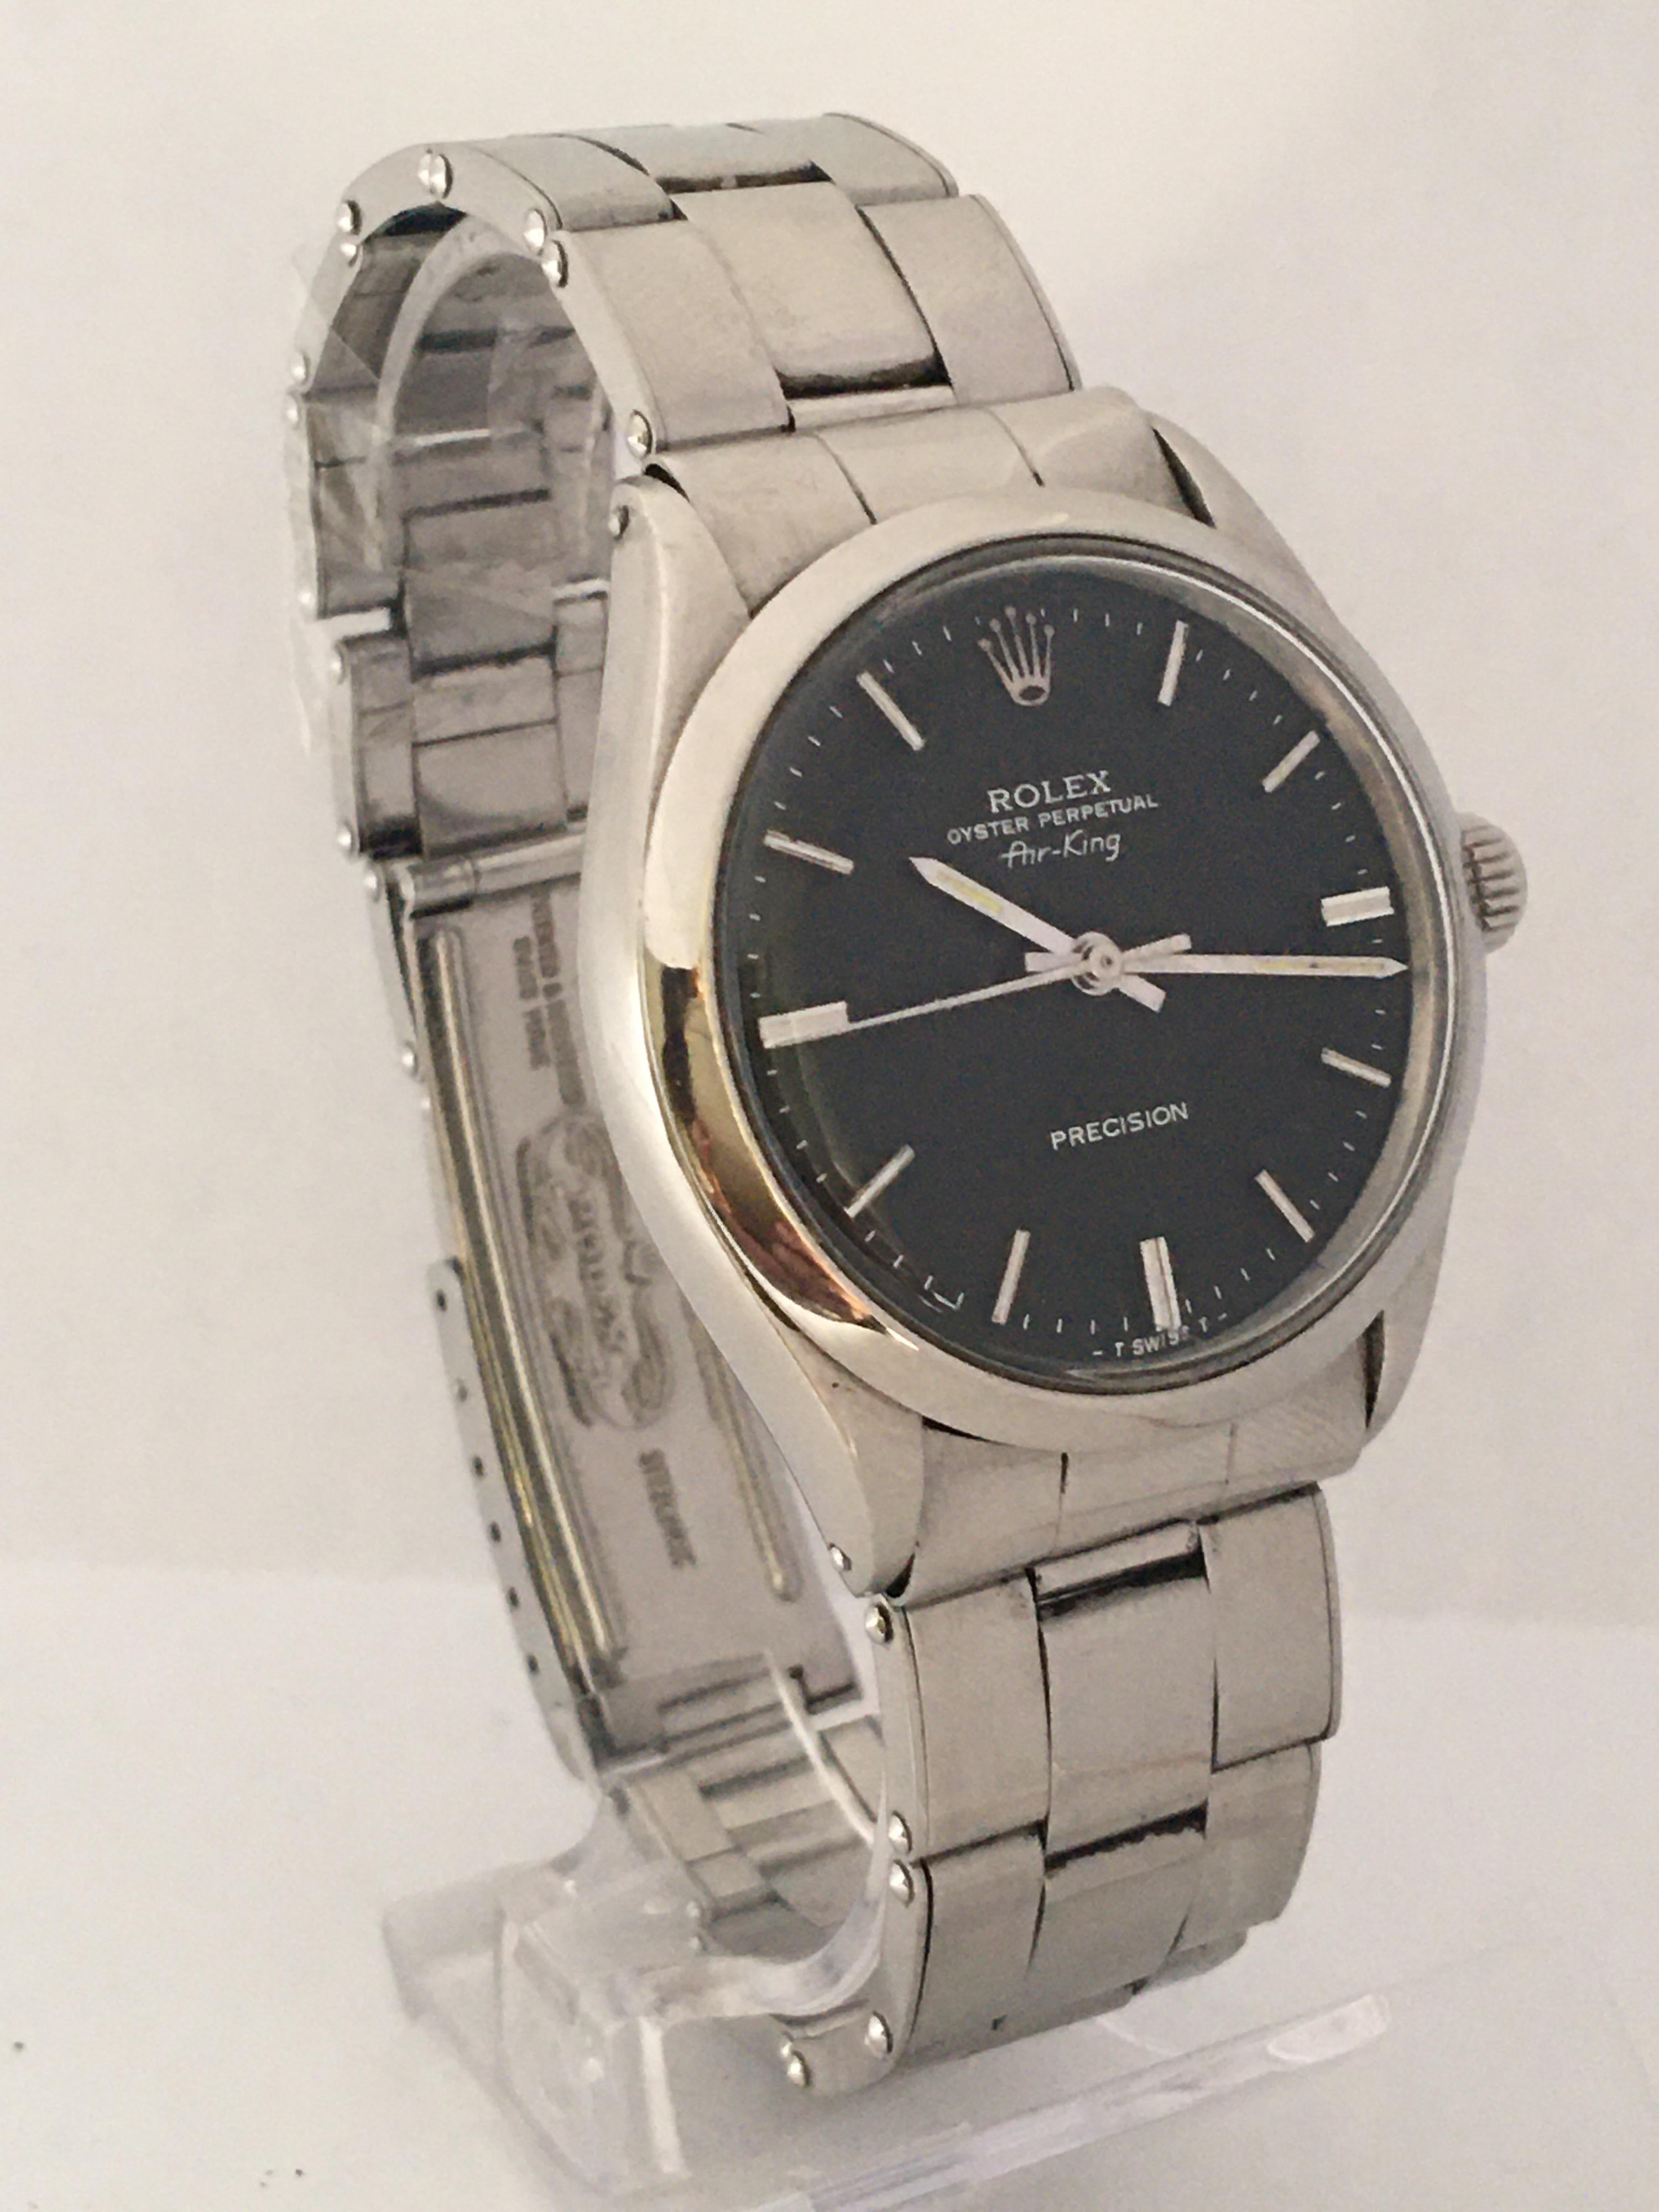 1960s SS Rolex Oyster Perpetual Air-King Precision, 1520 Mechanical Watch For Sale 4